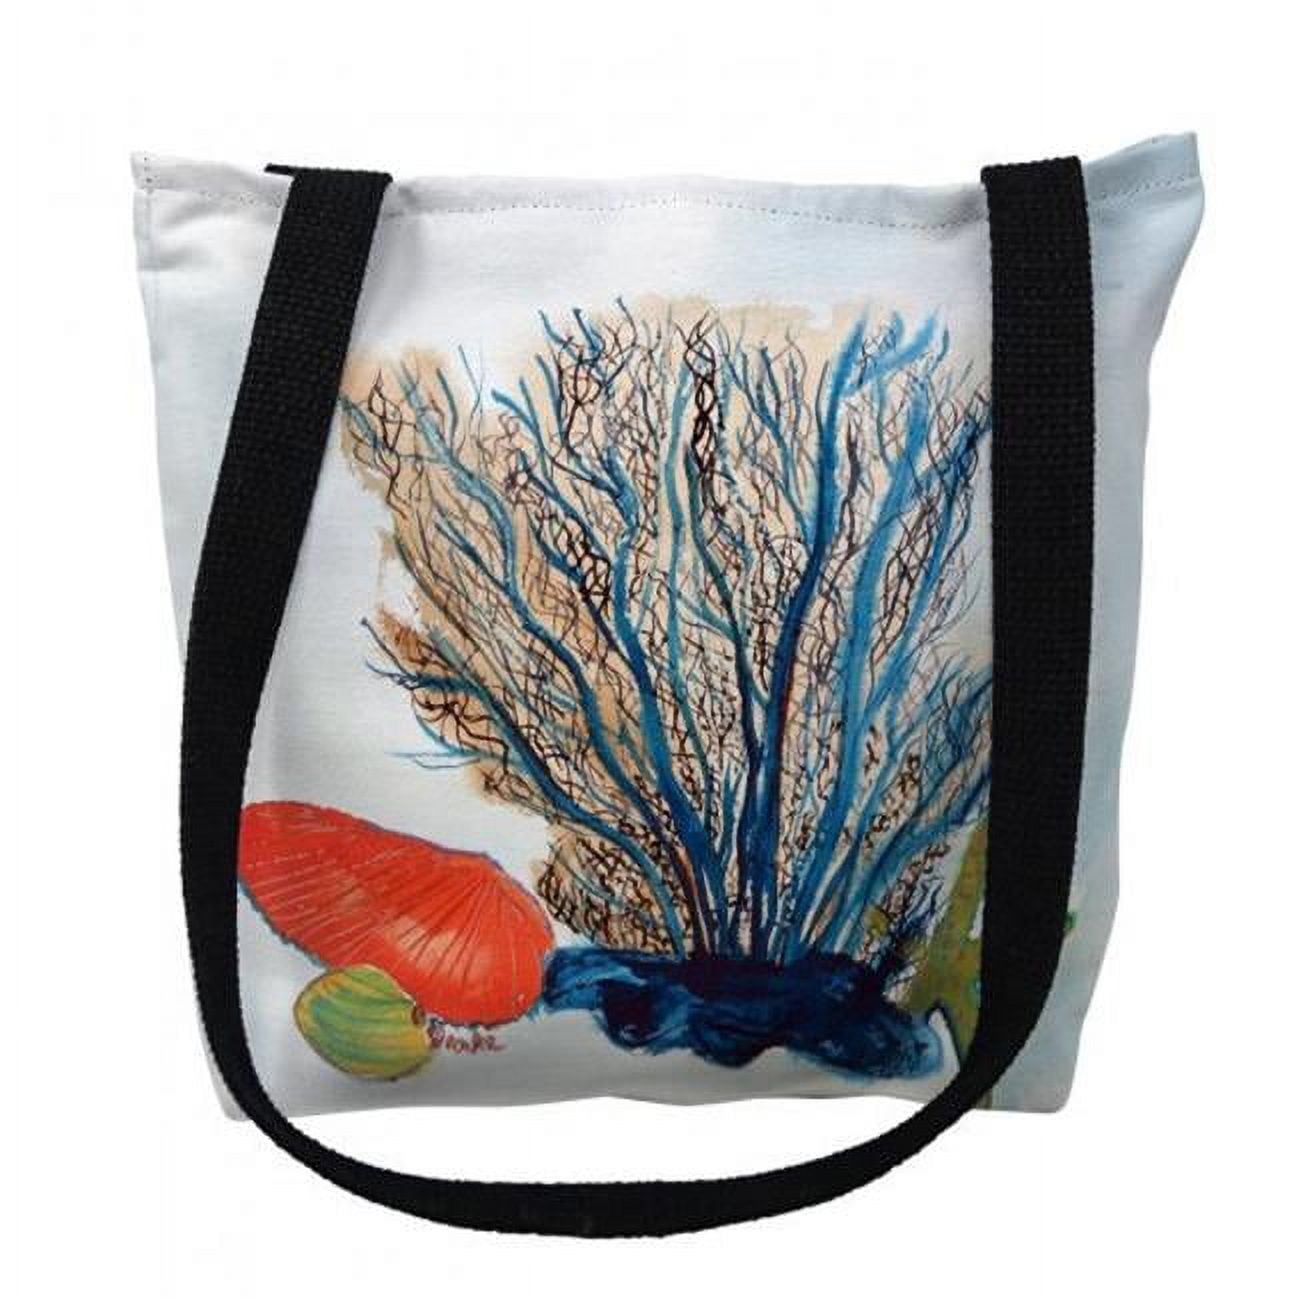 Ty1070m 16 X 16 In. Coral & Shells Tote Bag - Medium